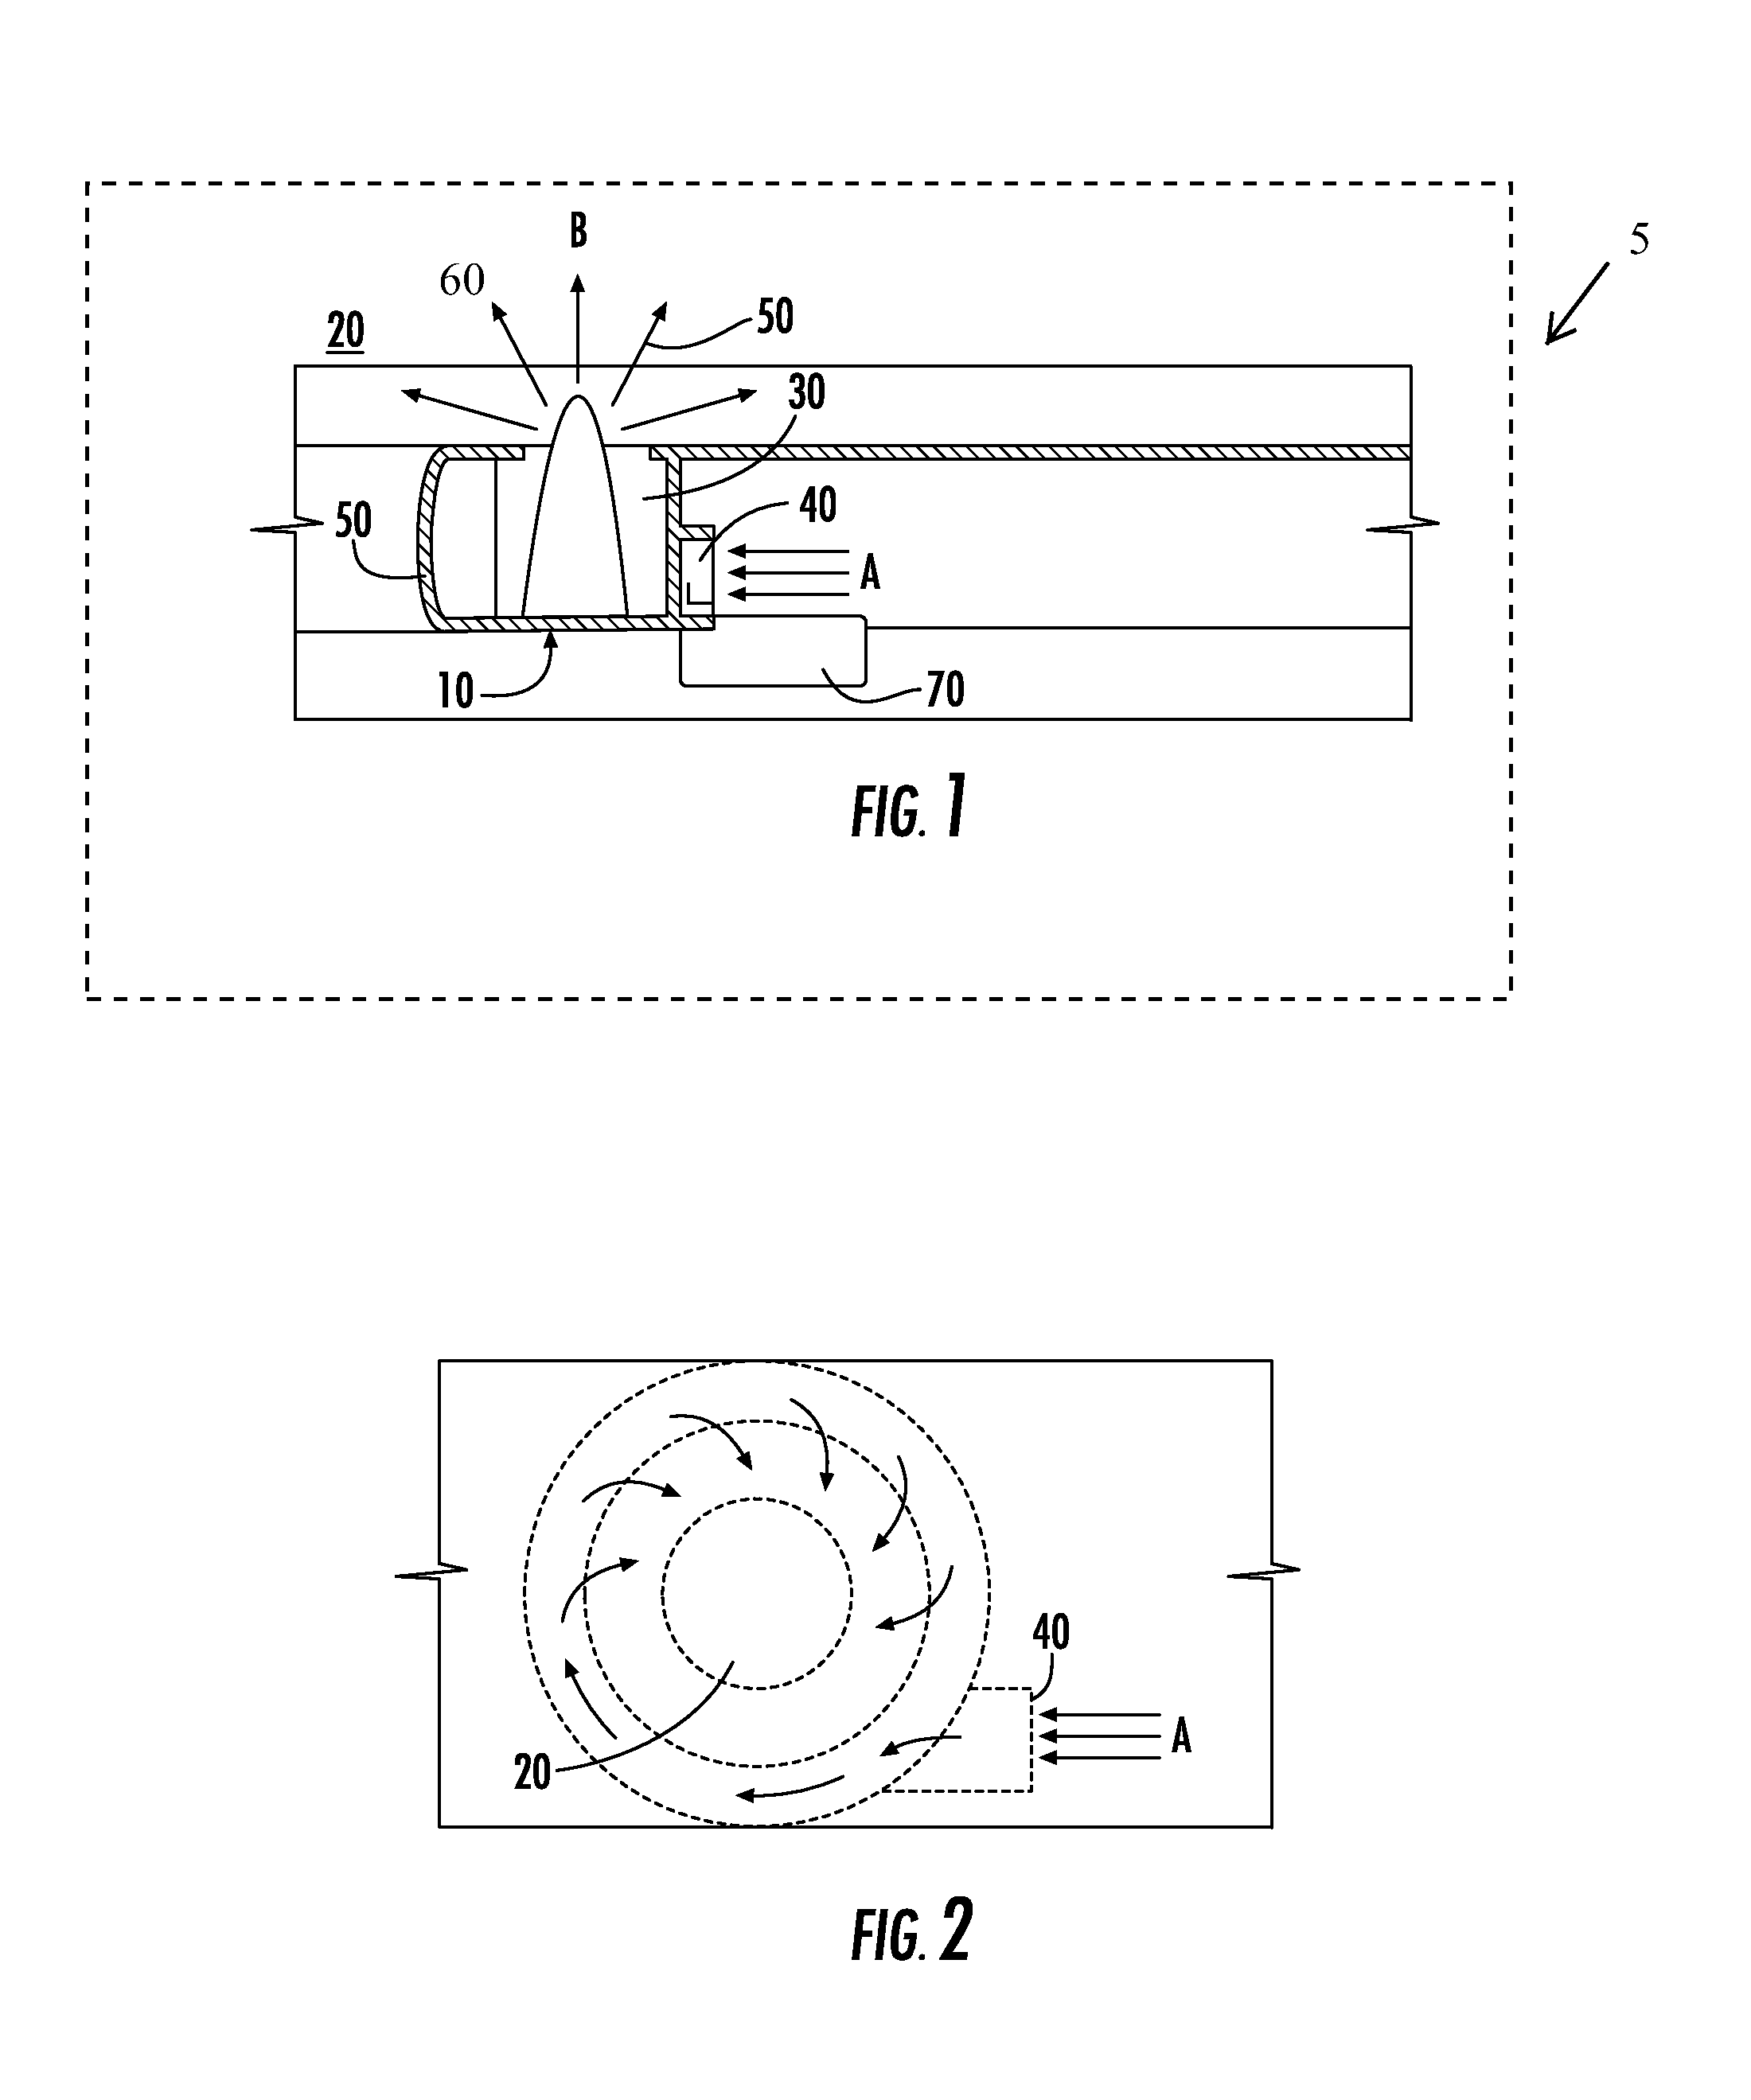 Variable spray-pattern in water-using cleaning appliances